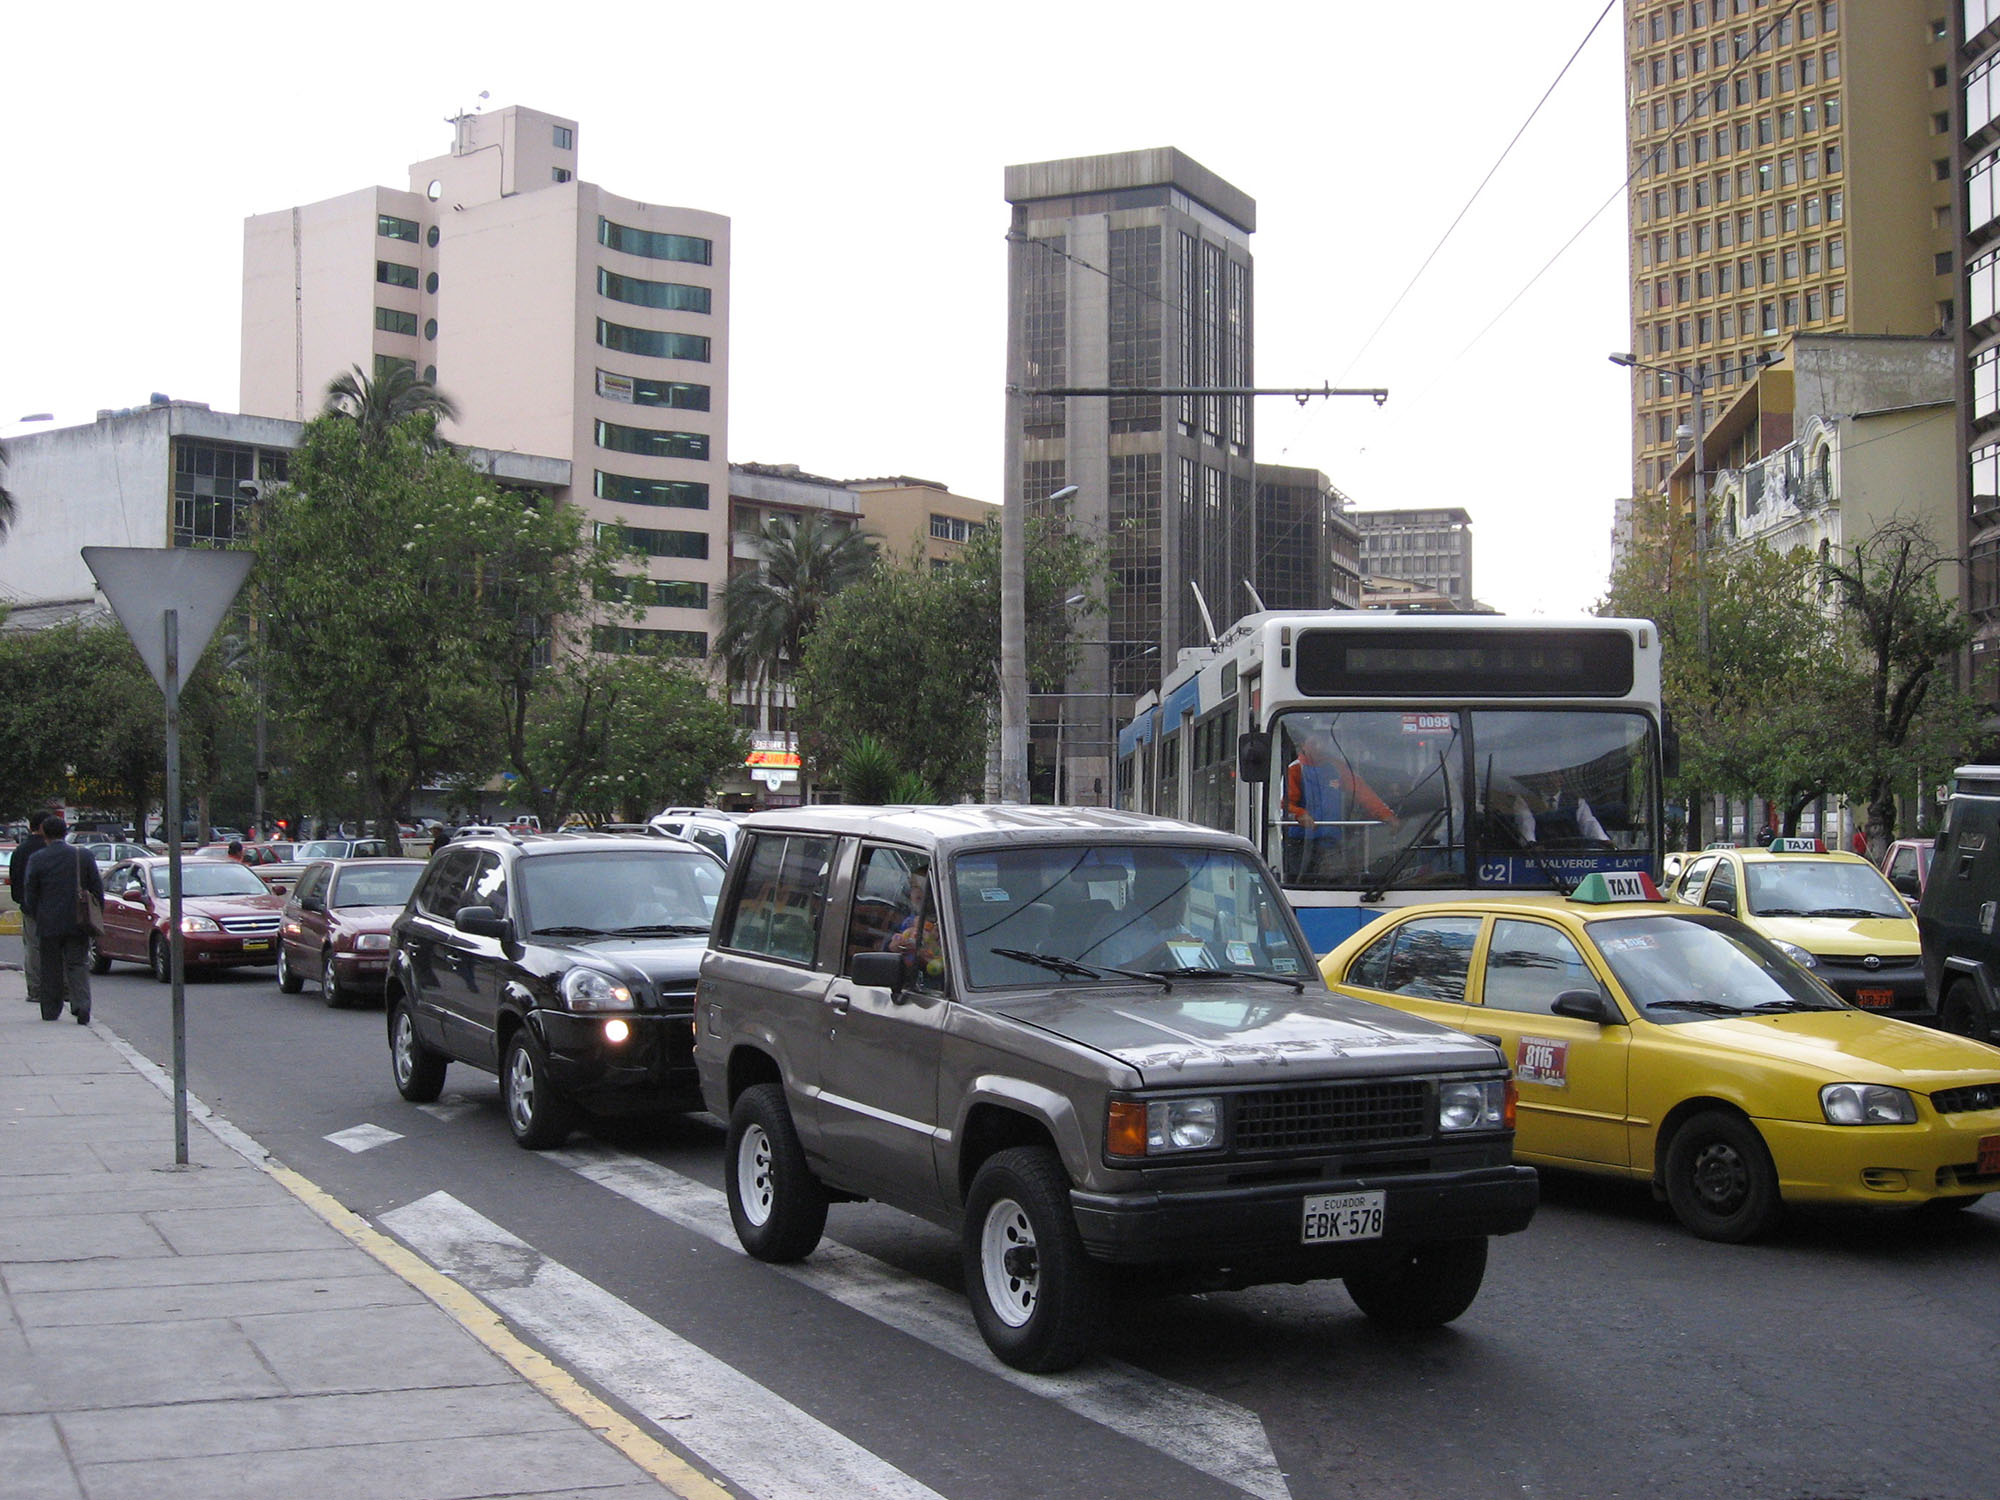 Fig. 22.23 In this image from Quito, Ecuador, the Trolé BRT vehicle operates in an “exclusive” curbside lane, but is blocked by merging traffic from a side street. A median busway would largely avoid these types of conflicts.